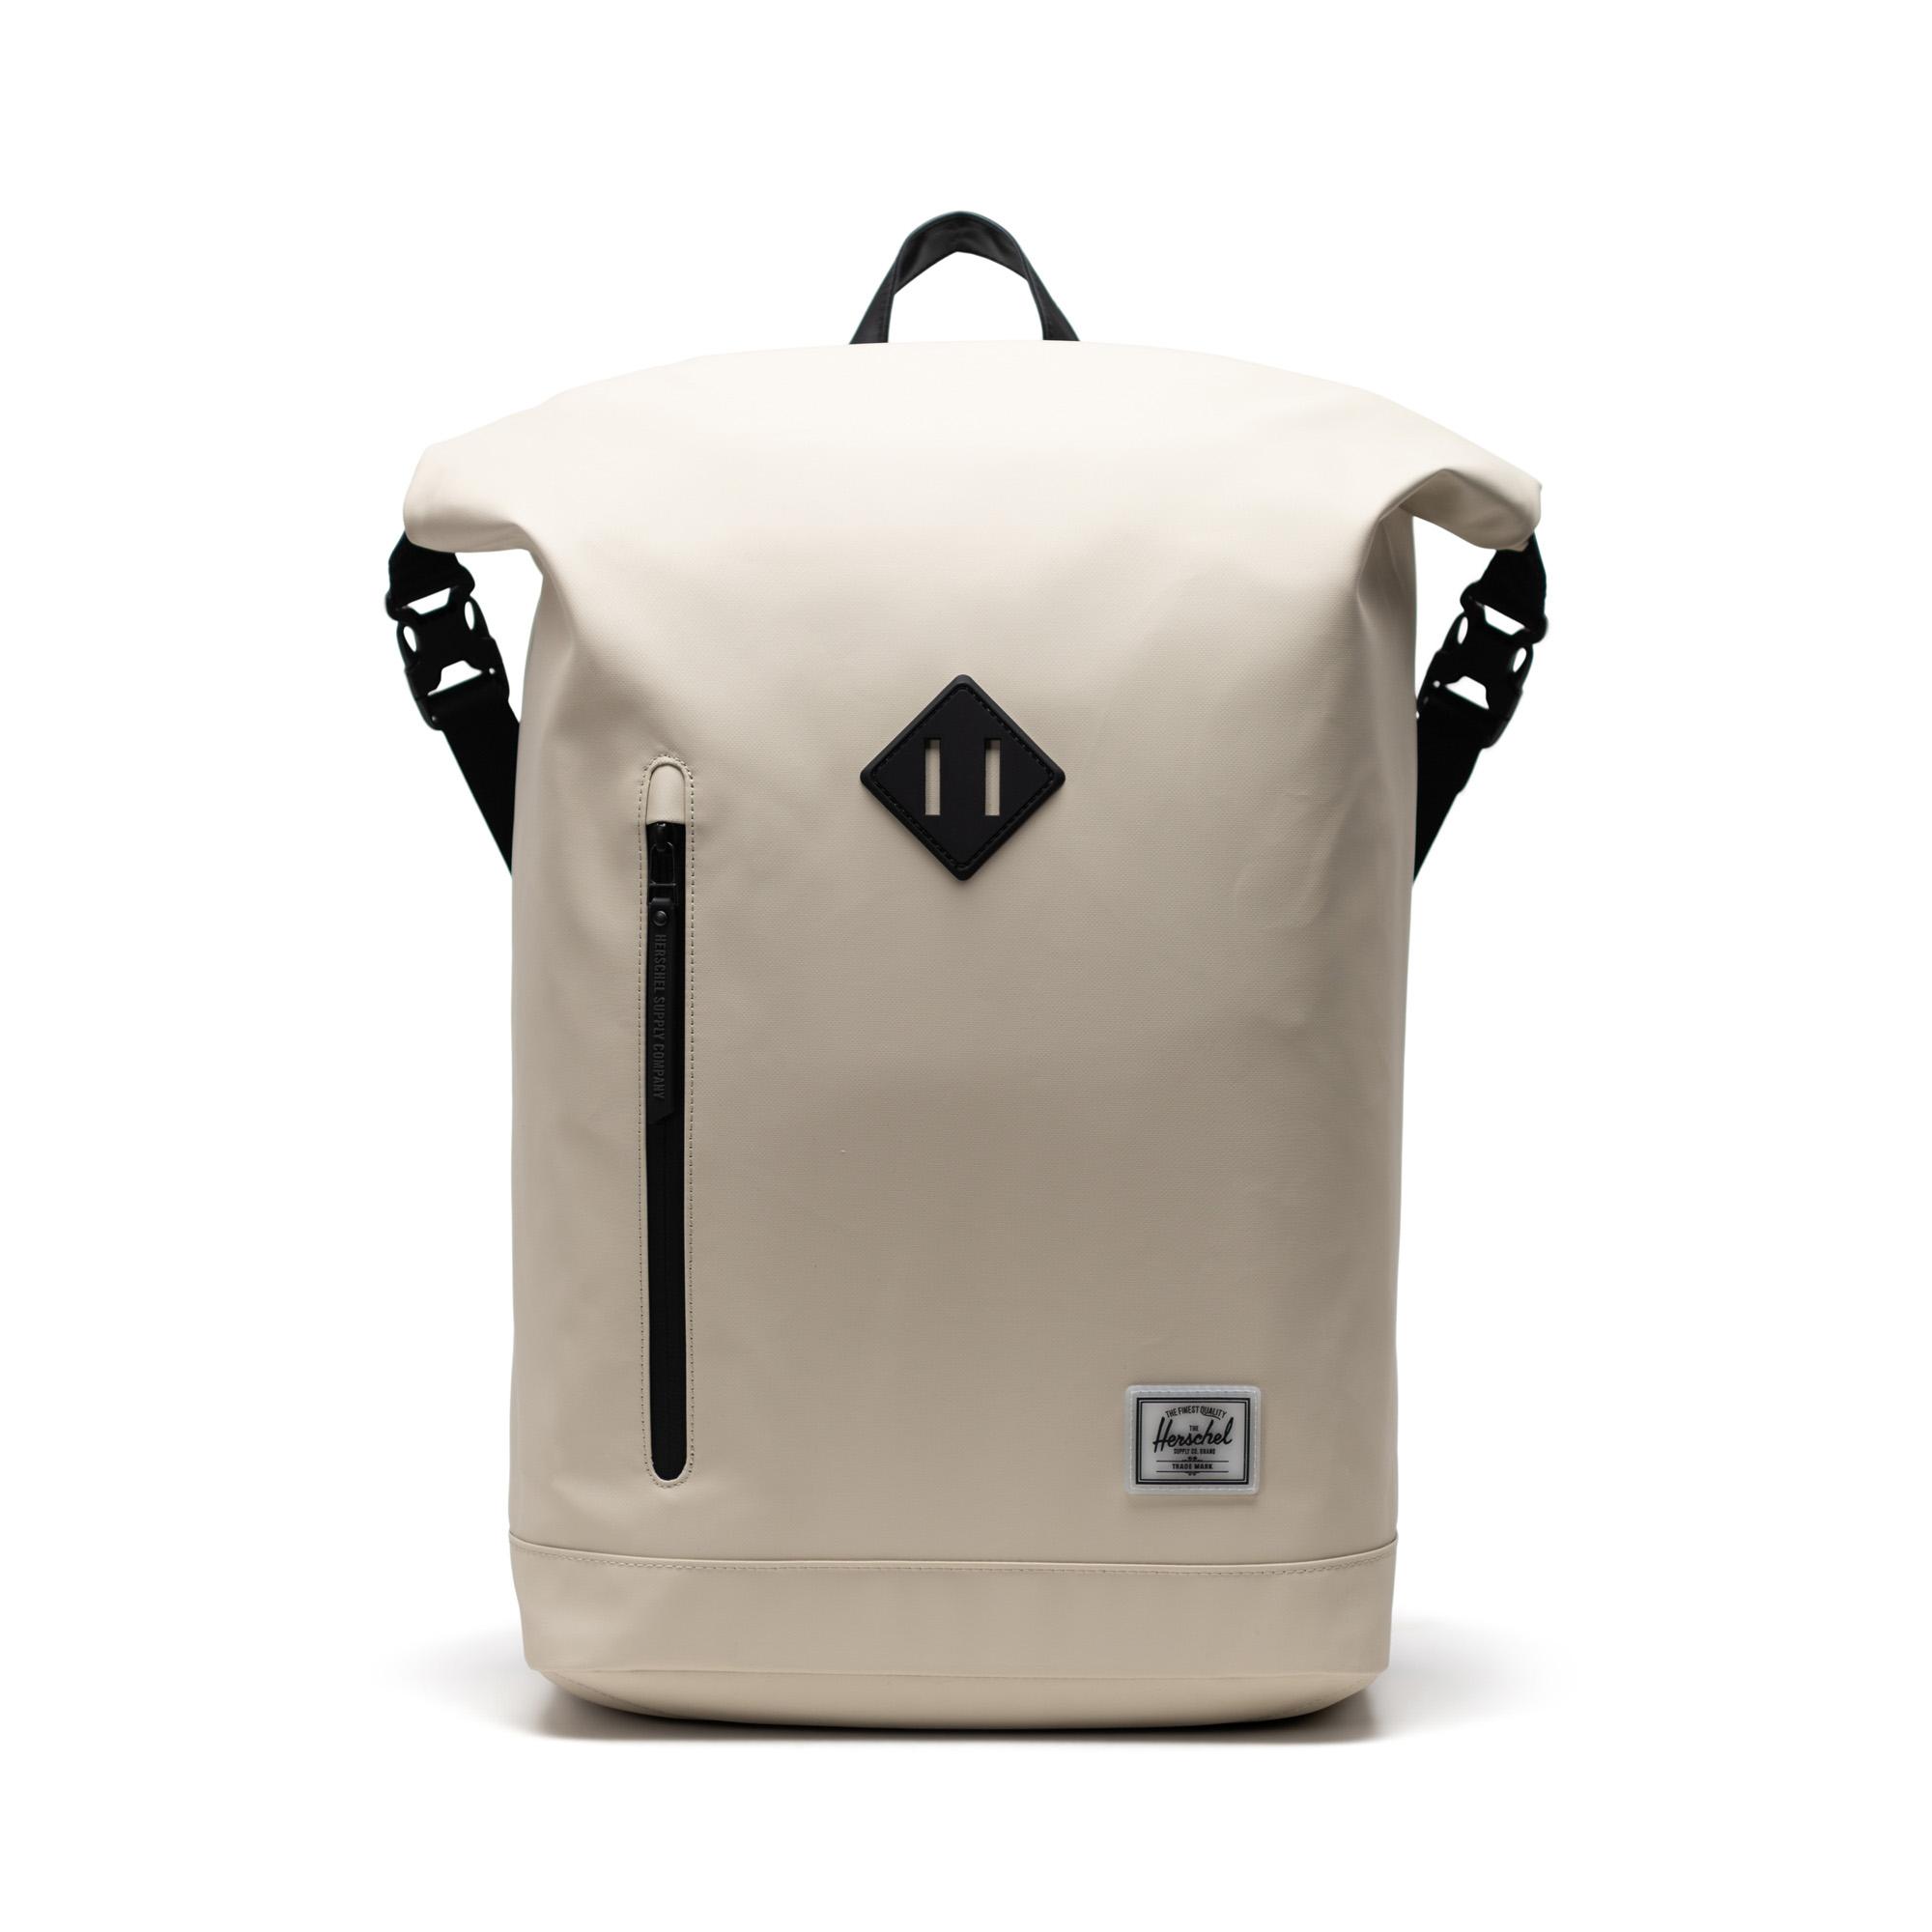 Herschel Supply Co. Roll Top Backpack in Natural | Lyst